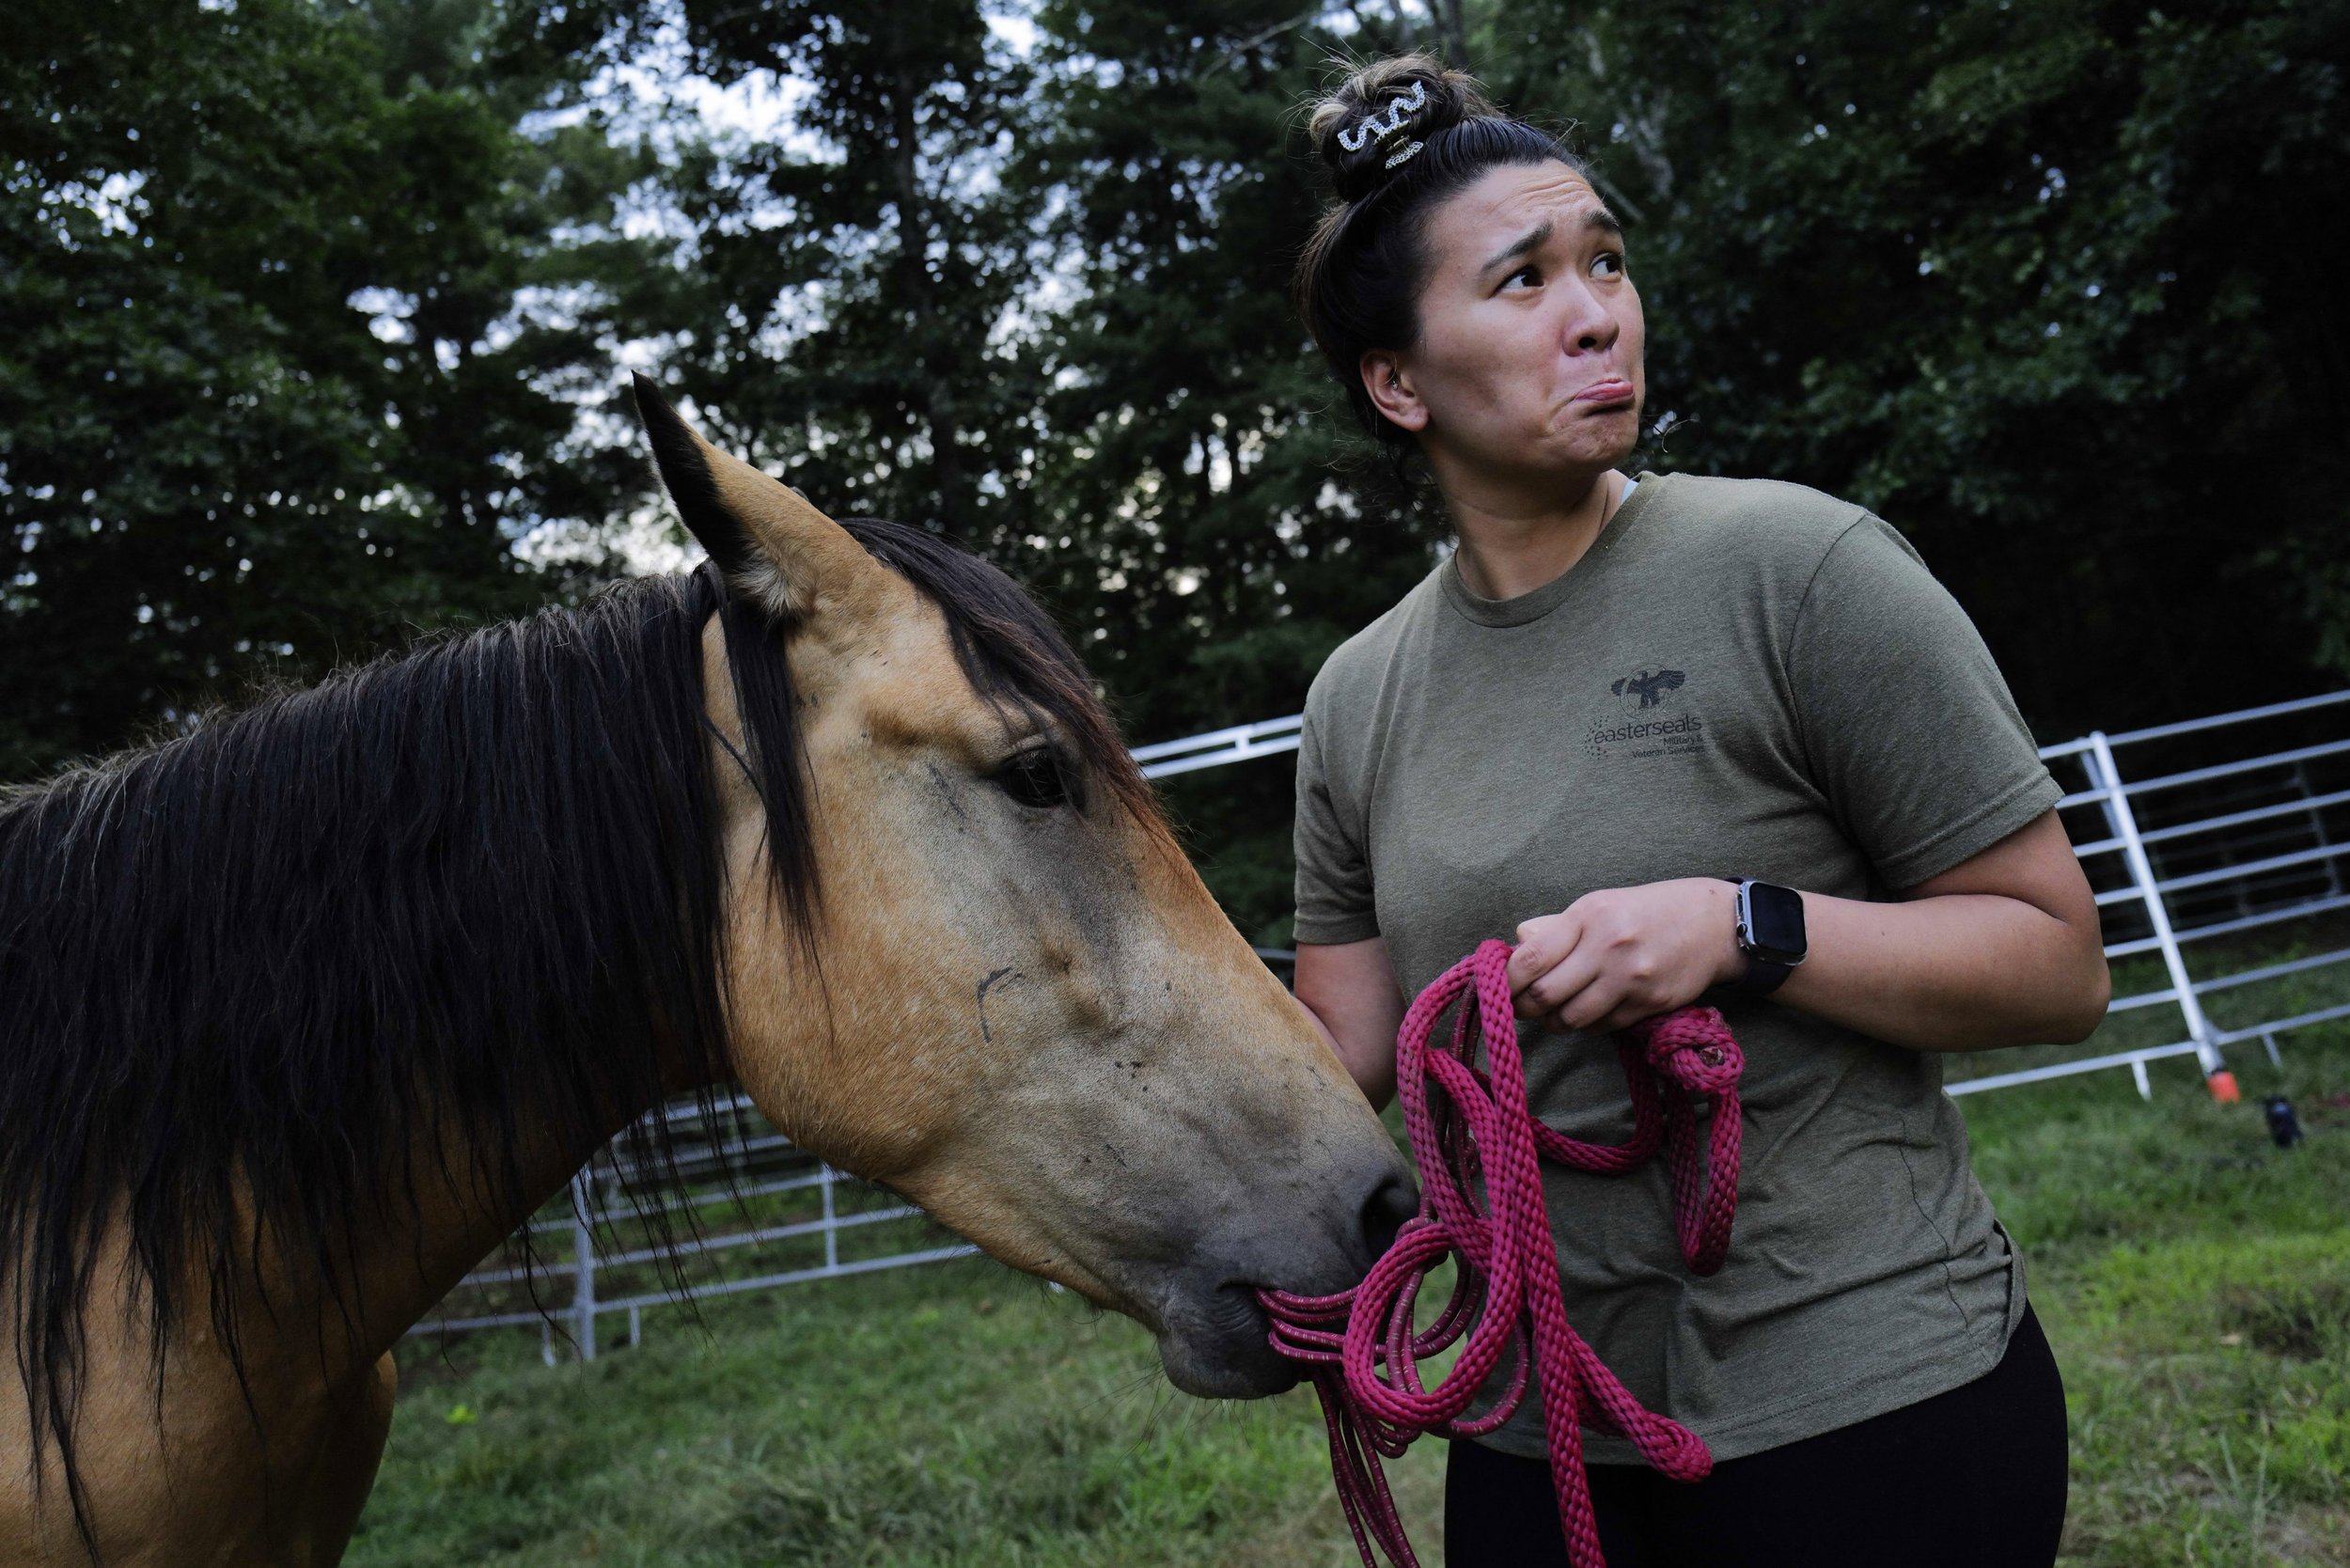  US Marines veteran Theresa Hughes bonds with her horse Kai, an American mustang found in a kill lot in Texas, after weeks of difficulty approaching the horse at Project ComeBack in Holliston, Mass. on August 10, 2022. 